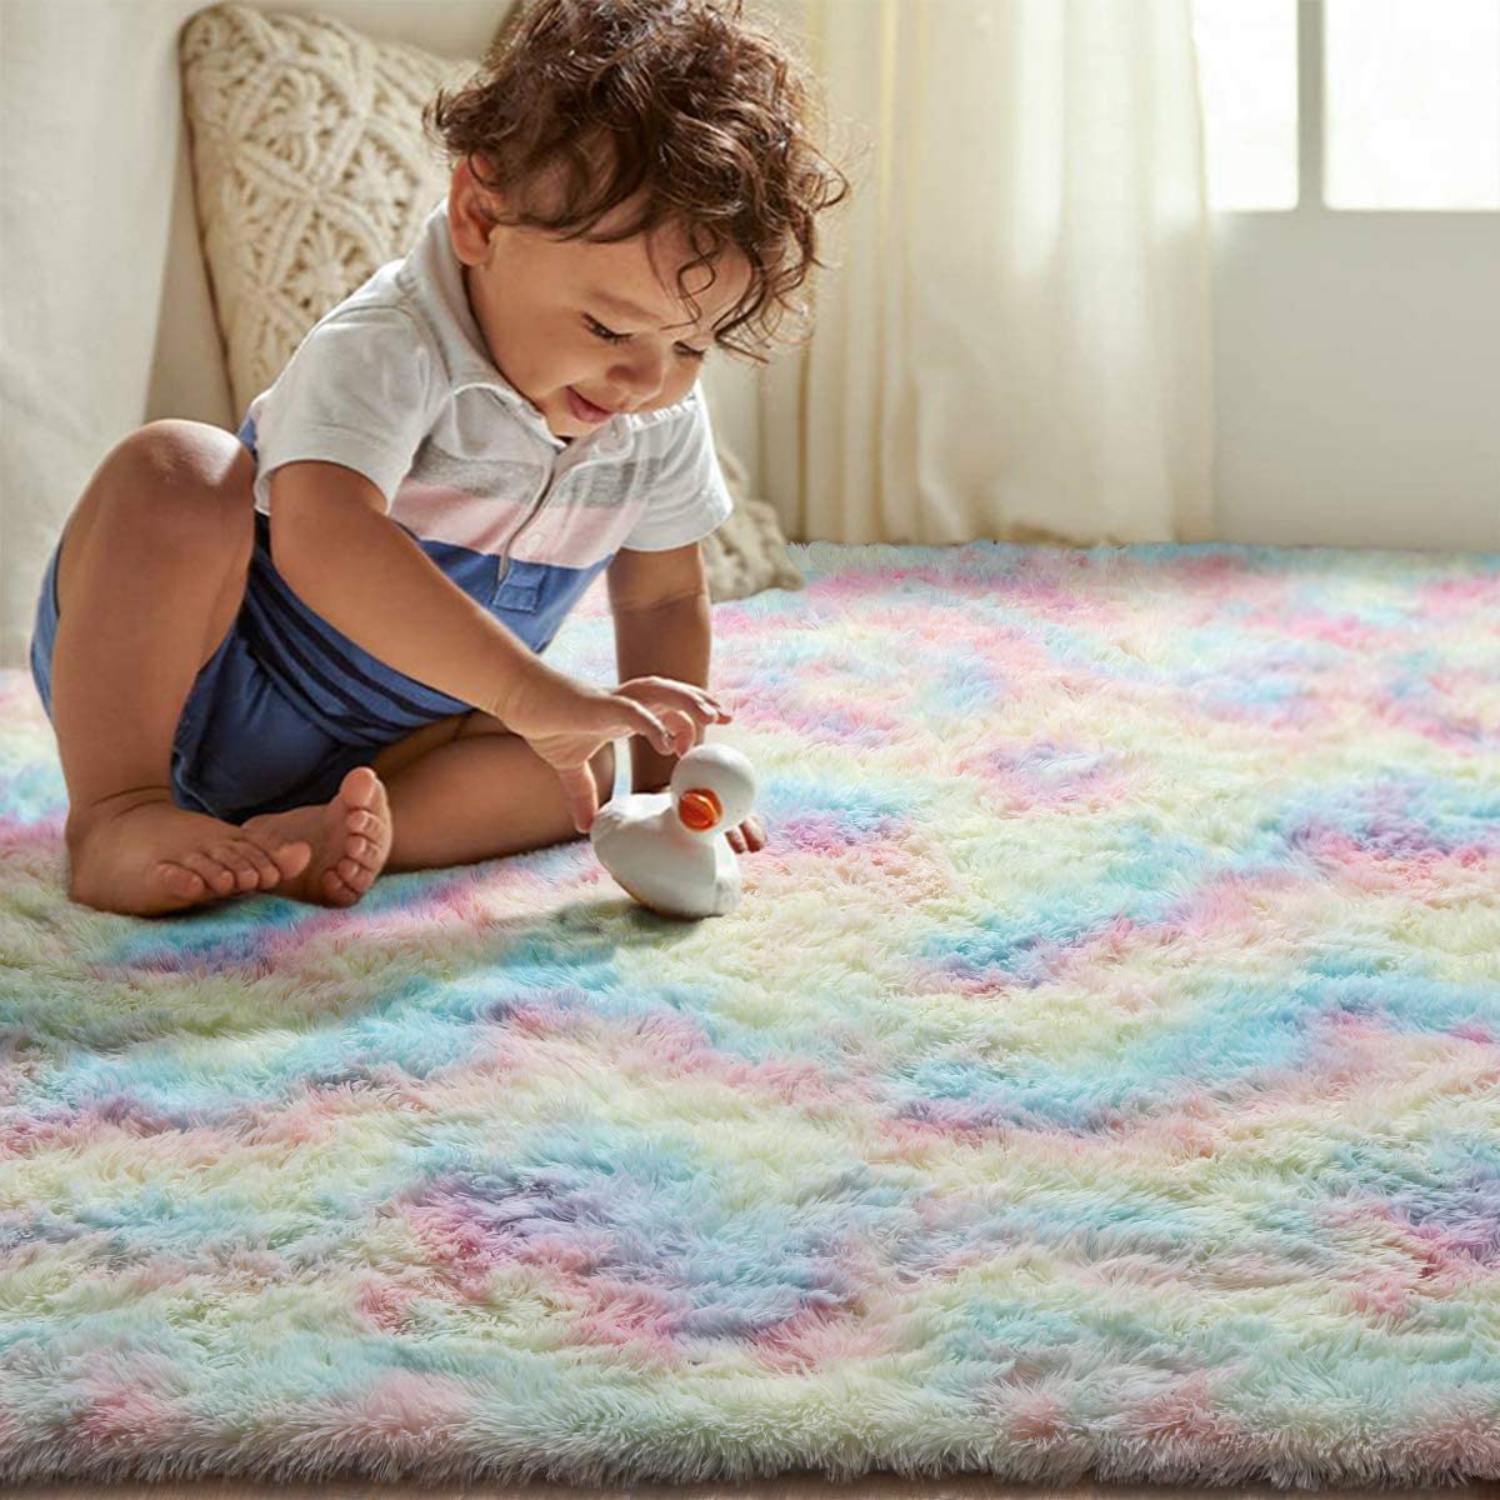 Rainbow Area Rug for Kids Play Room Warm Soft Luxury Rug Plush Throw Rugs High Pile Rug Handmade Knitted Nursery Decoration Rugs Baby Care Crawling Carpet, 3ft x 5ft - image 3 of 7